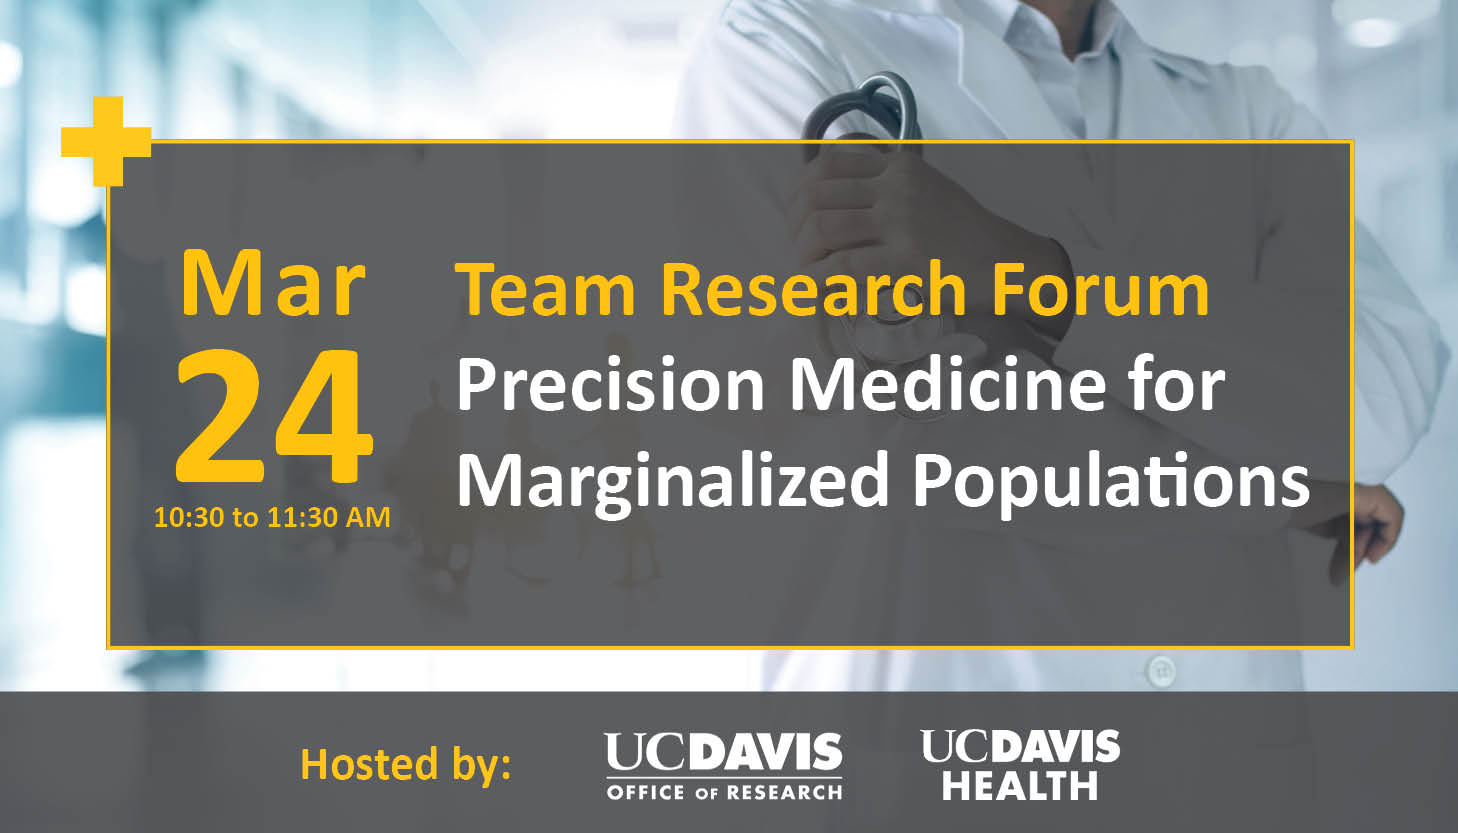 Team Research Forum March 24 at 10:30am. Precision Medicine for Marginalized Populations